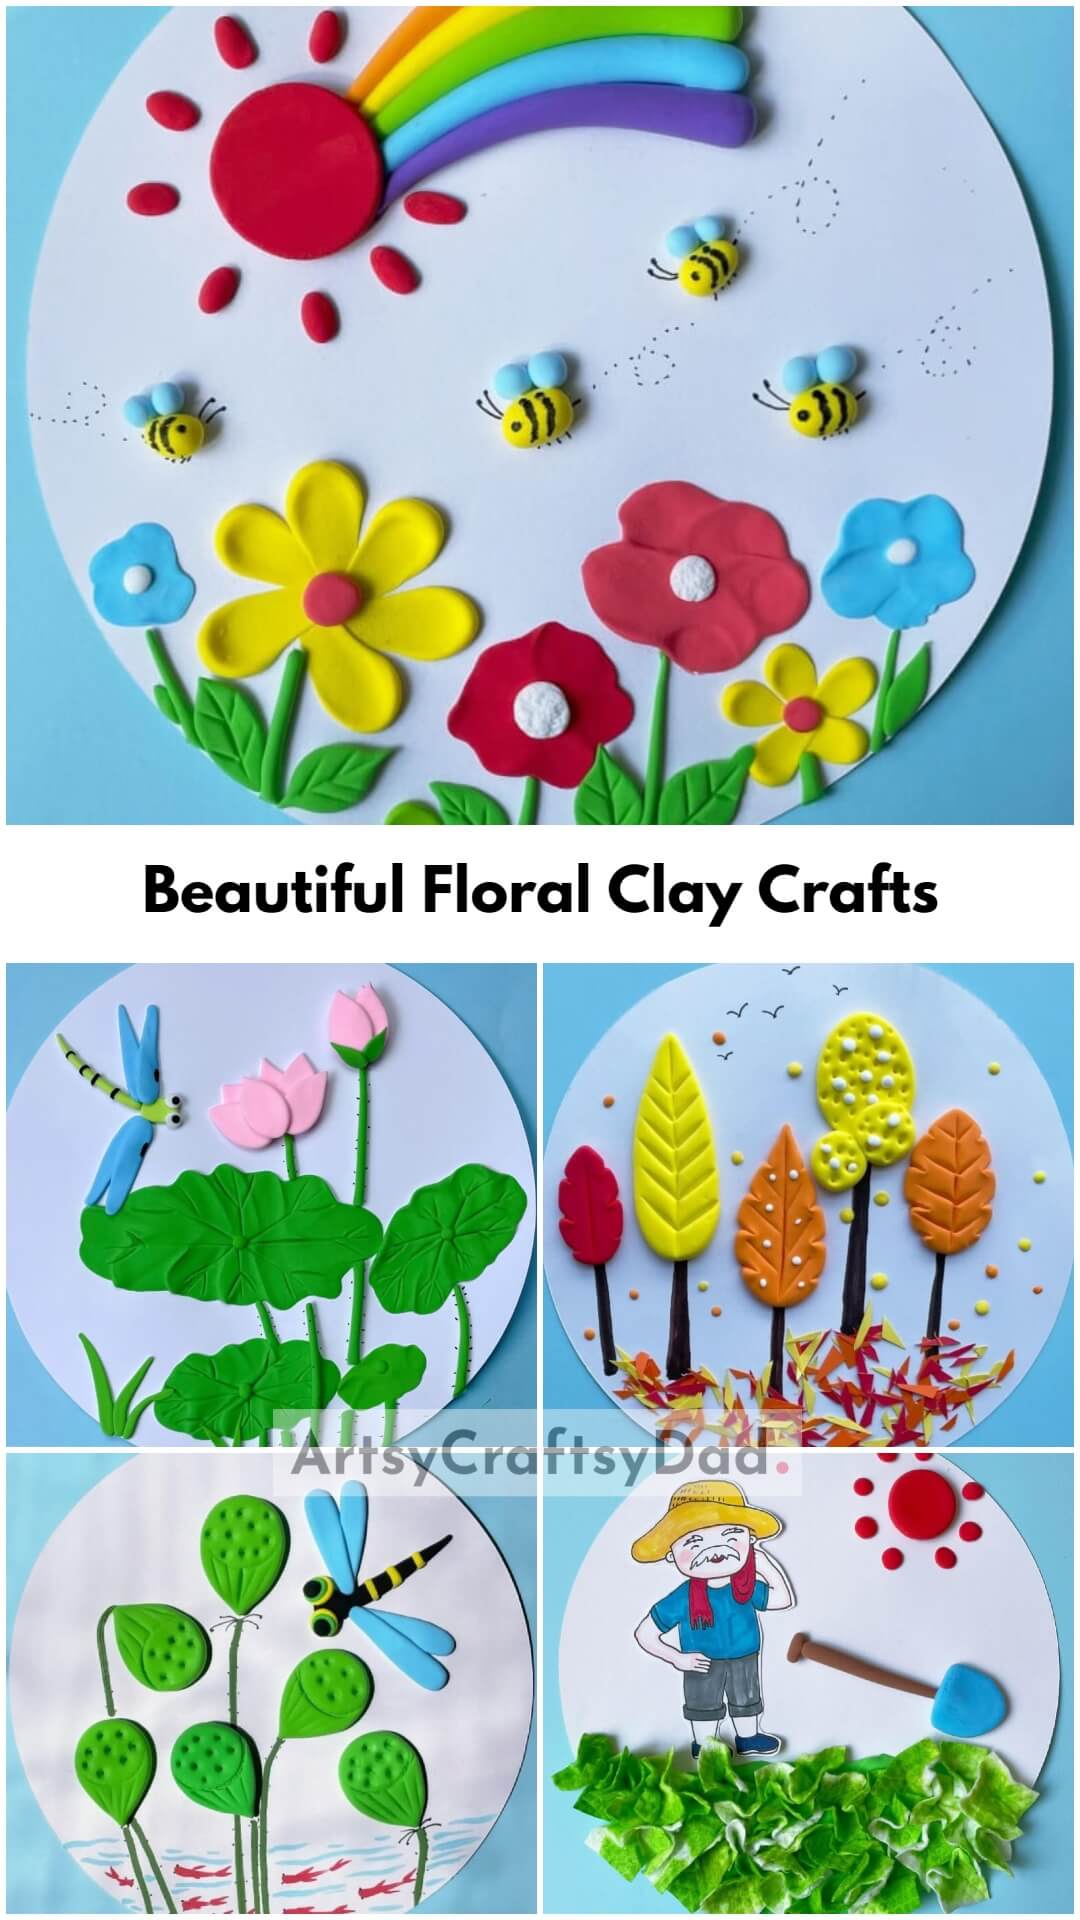 Unique and Beautiful Floral Clay Crafts